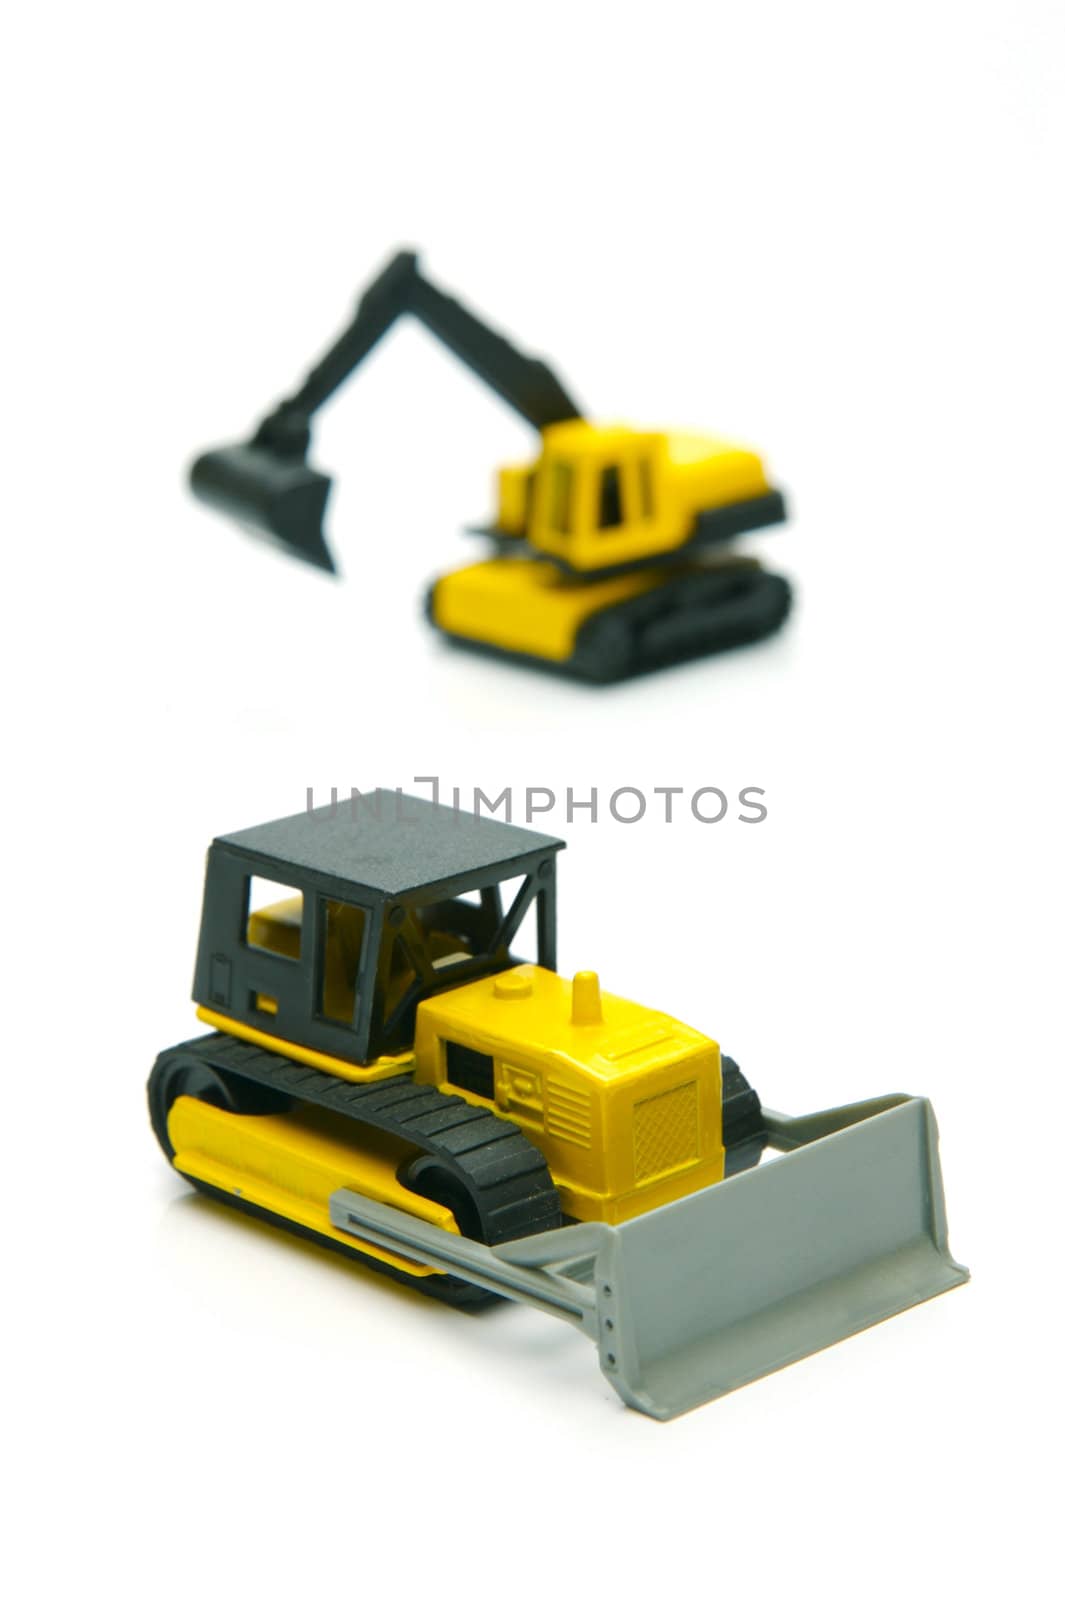 Miniature Construction Toys by Kitch